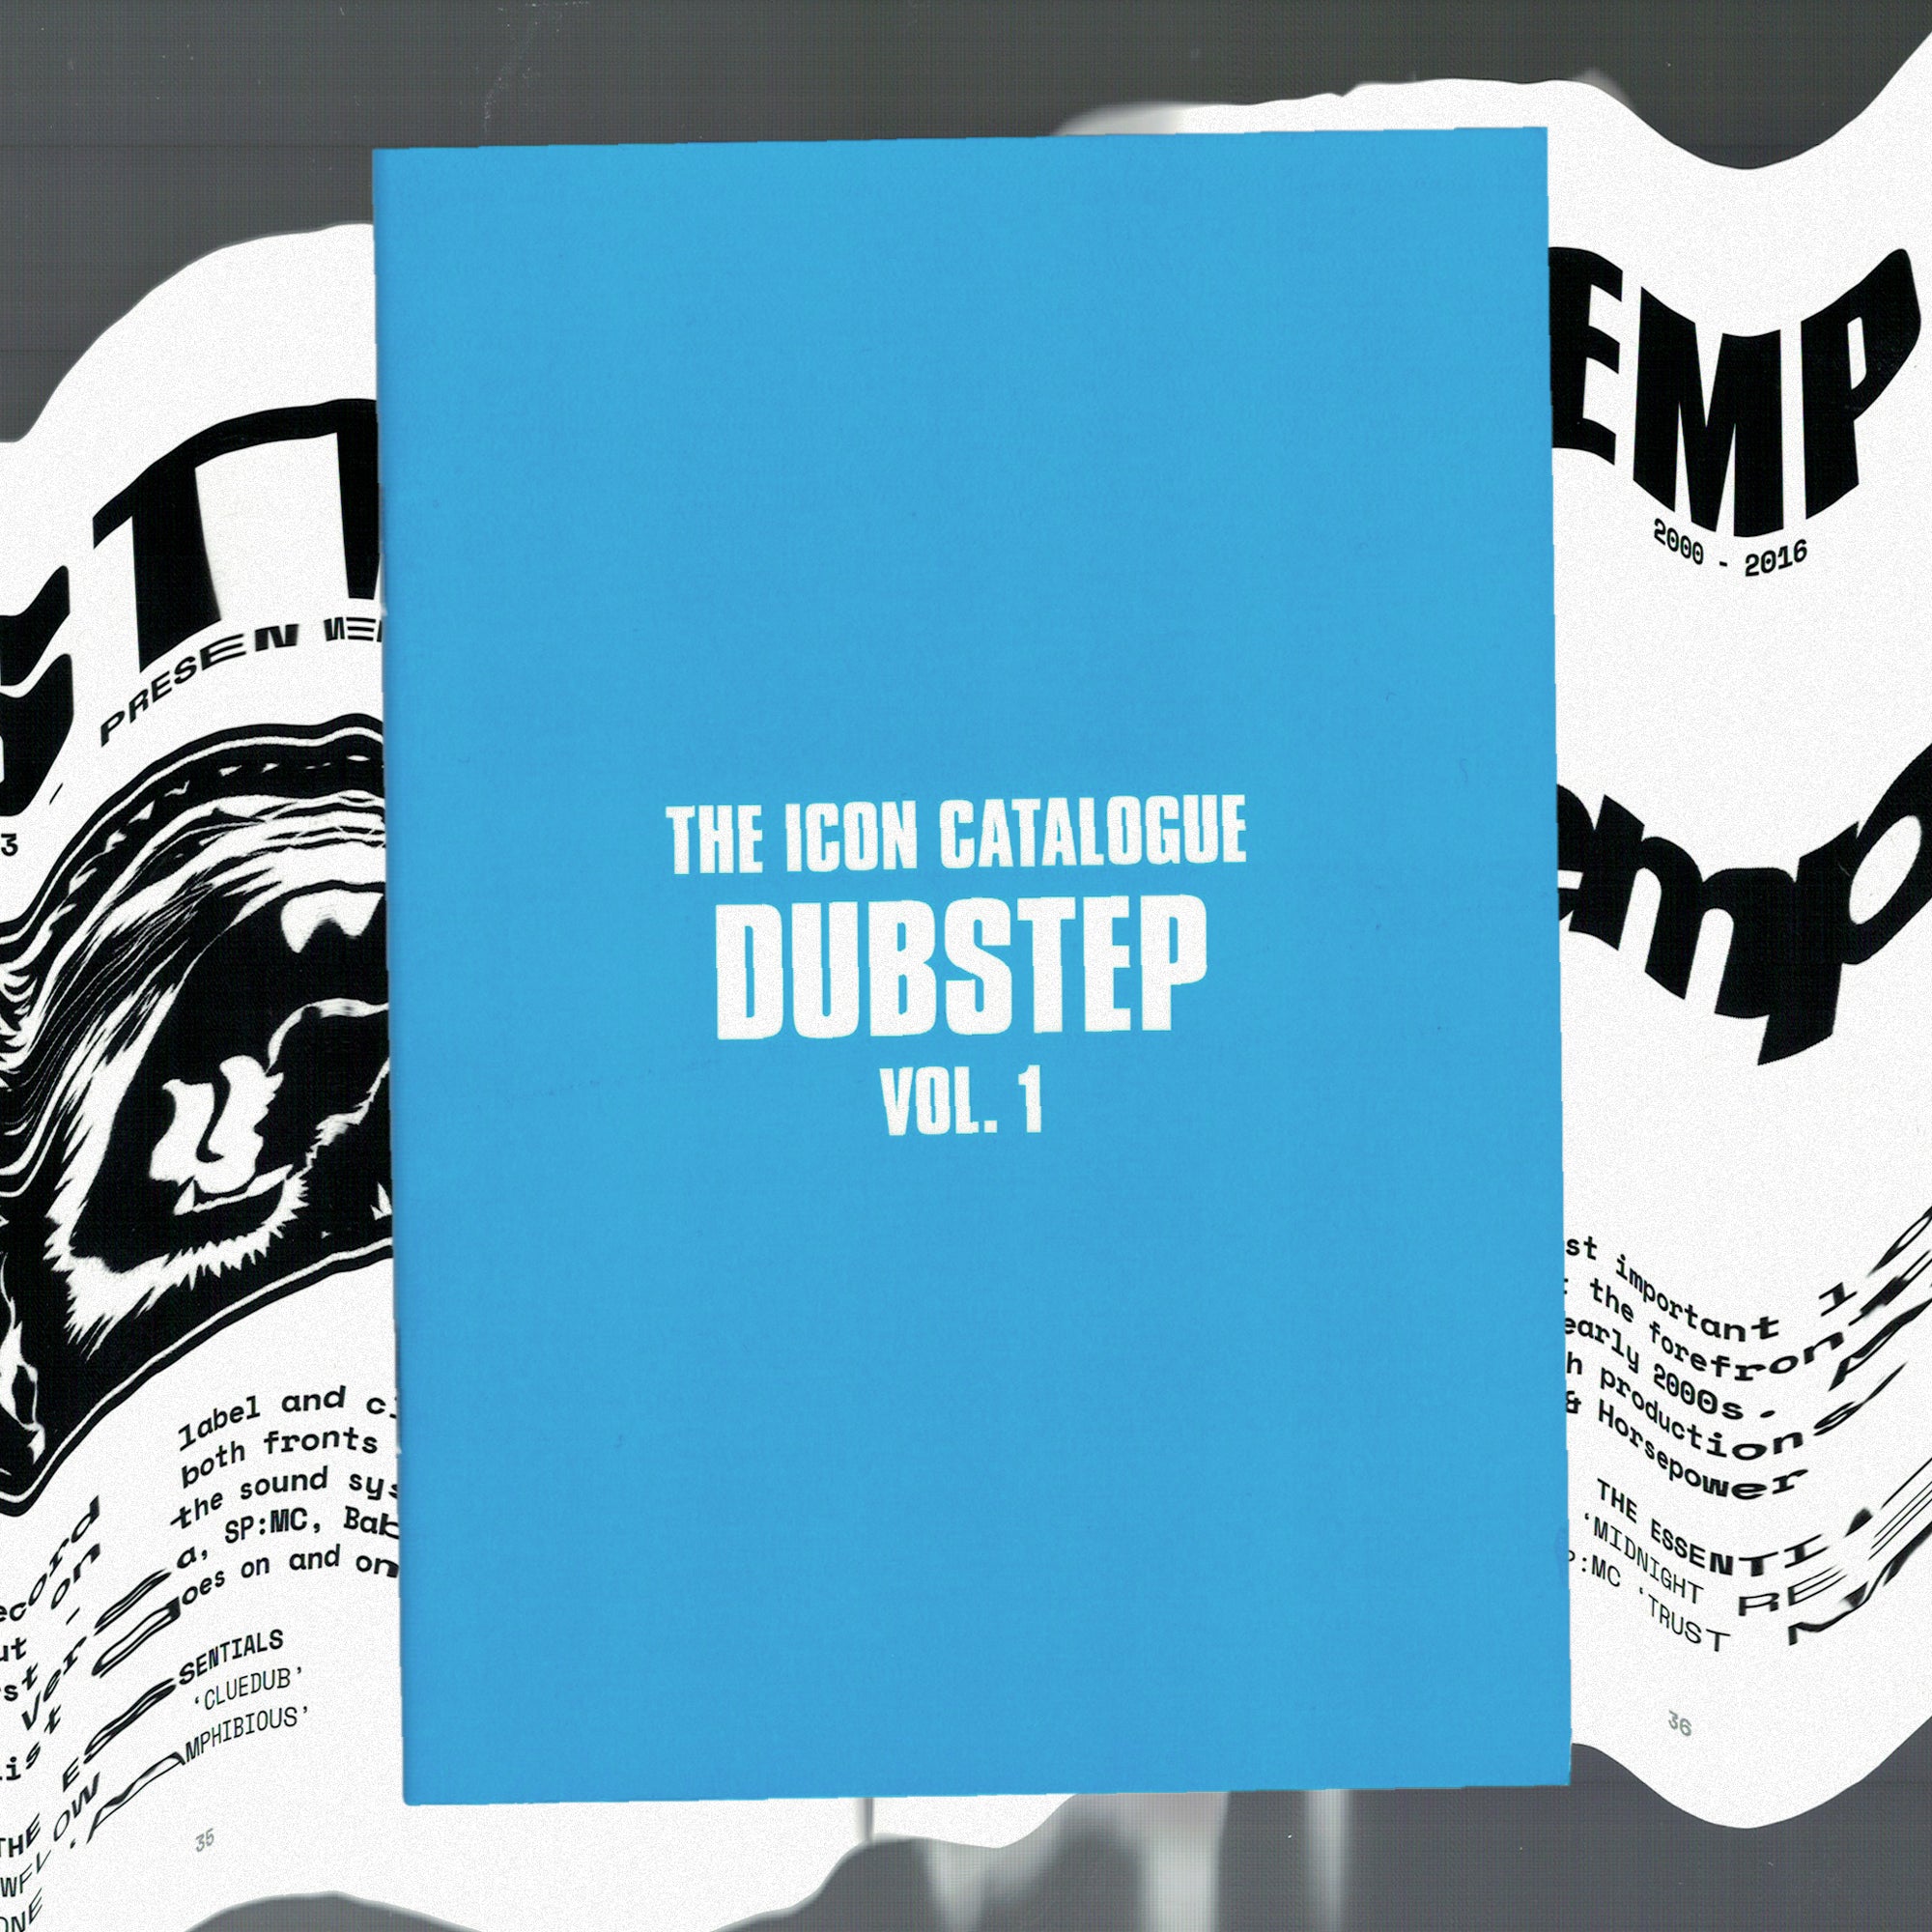 THE ICON CATALOGUE - DUBSTEP VOL 1